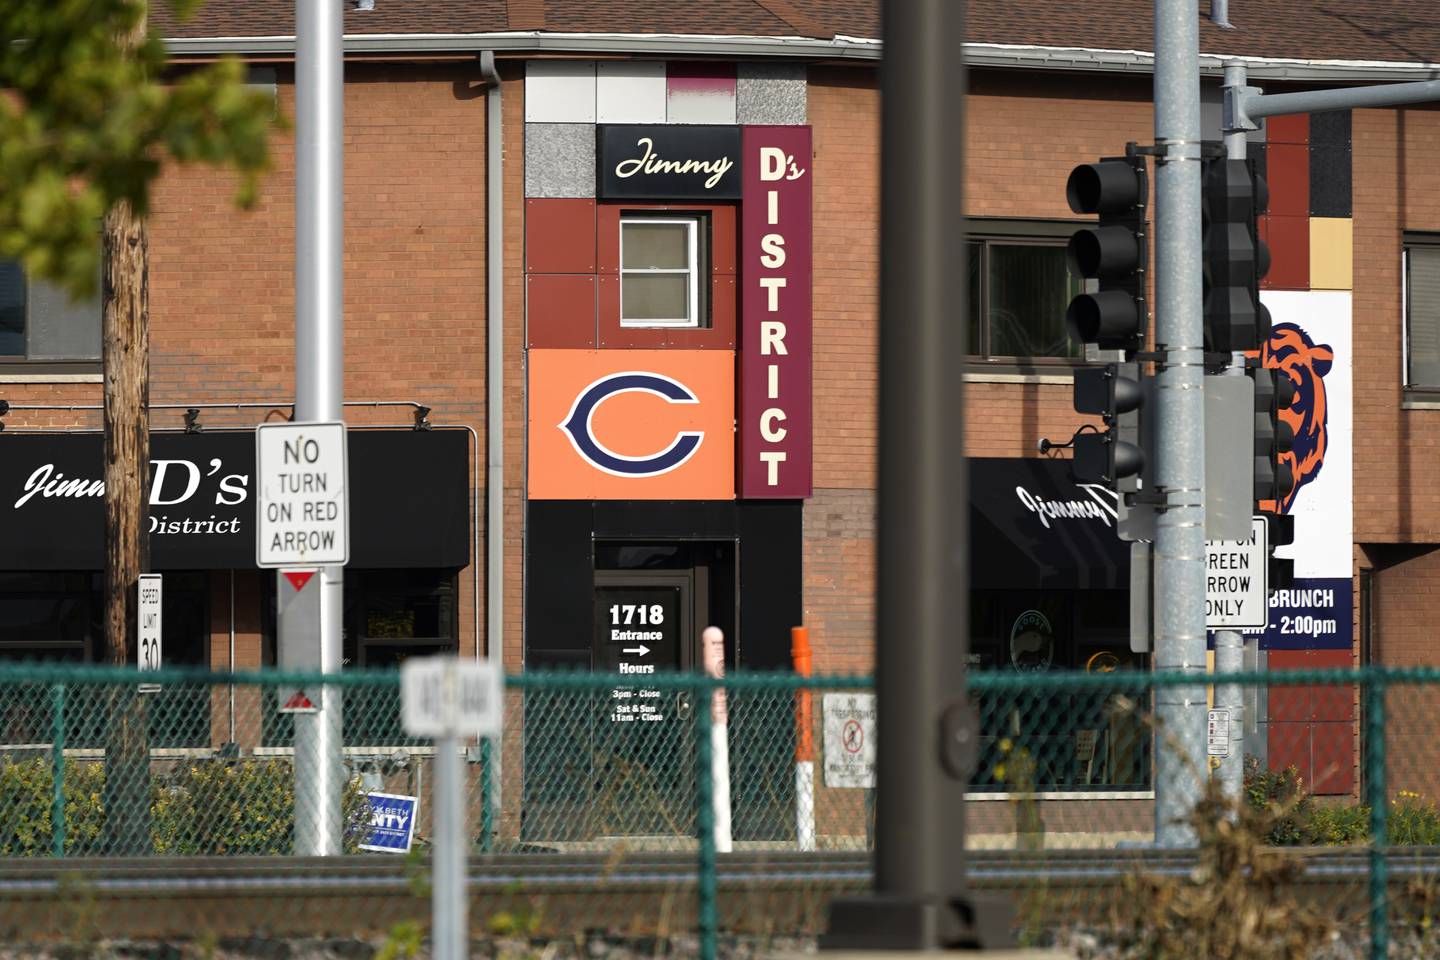 A Chicago Bears logo is seen at a restaurant near Arlington International Racecourse in Arlington Heights, Ill., Friday, Oct. 14, 2022. With the horses long gone, the Chicago Bears see 326 acres of opportunity at the site. The Buffalo Bills also are making plans for a new home. Same for the Tennessee Titans and baseball's Kansas City Royals. Major League Soccer's Inter Miami is working on its new place, and on and on it goes. (AP Photo/Nam Y. Huh)